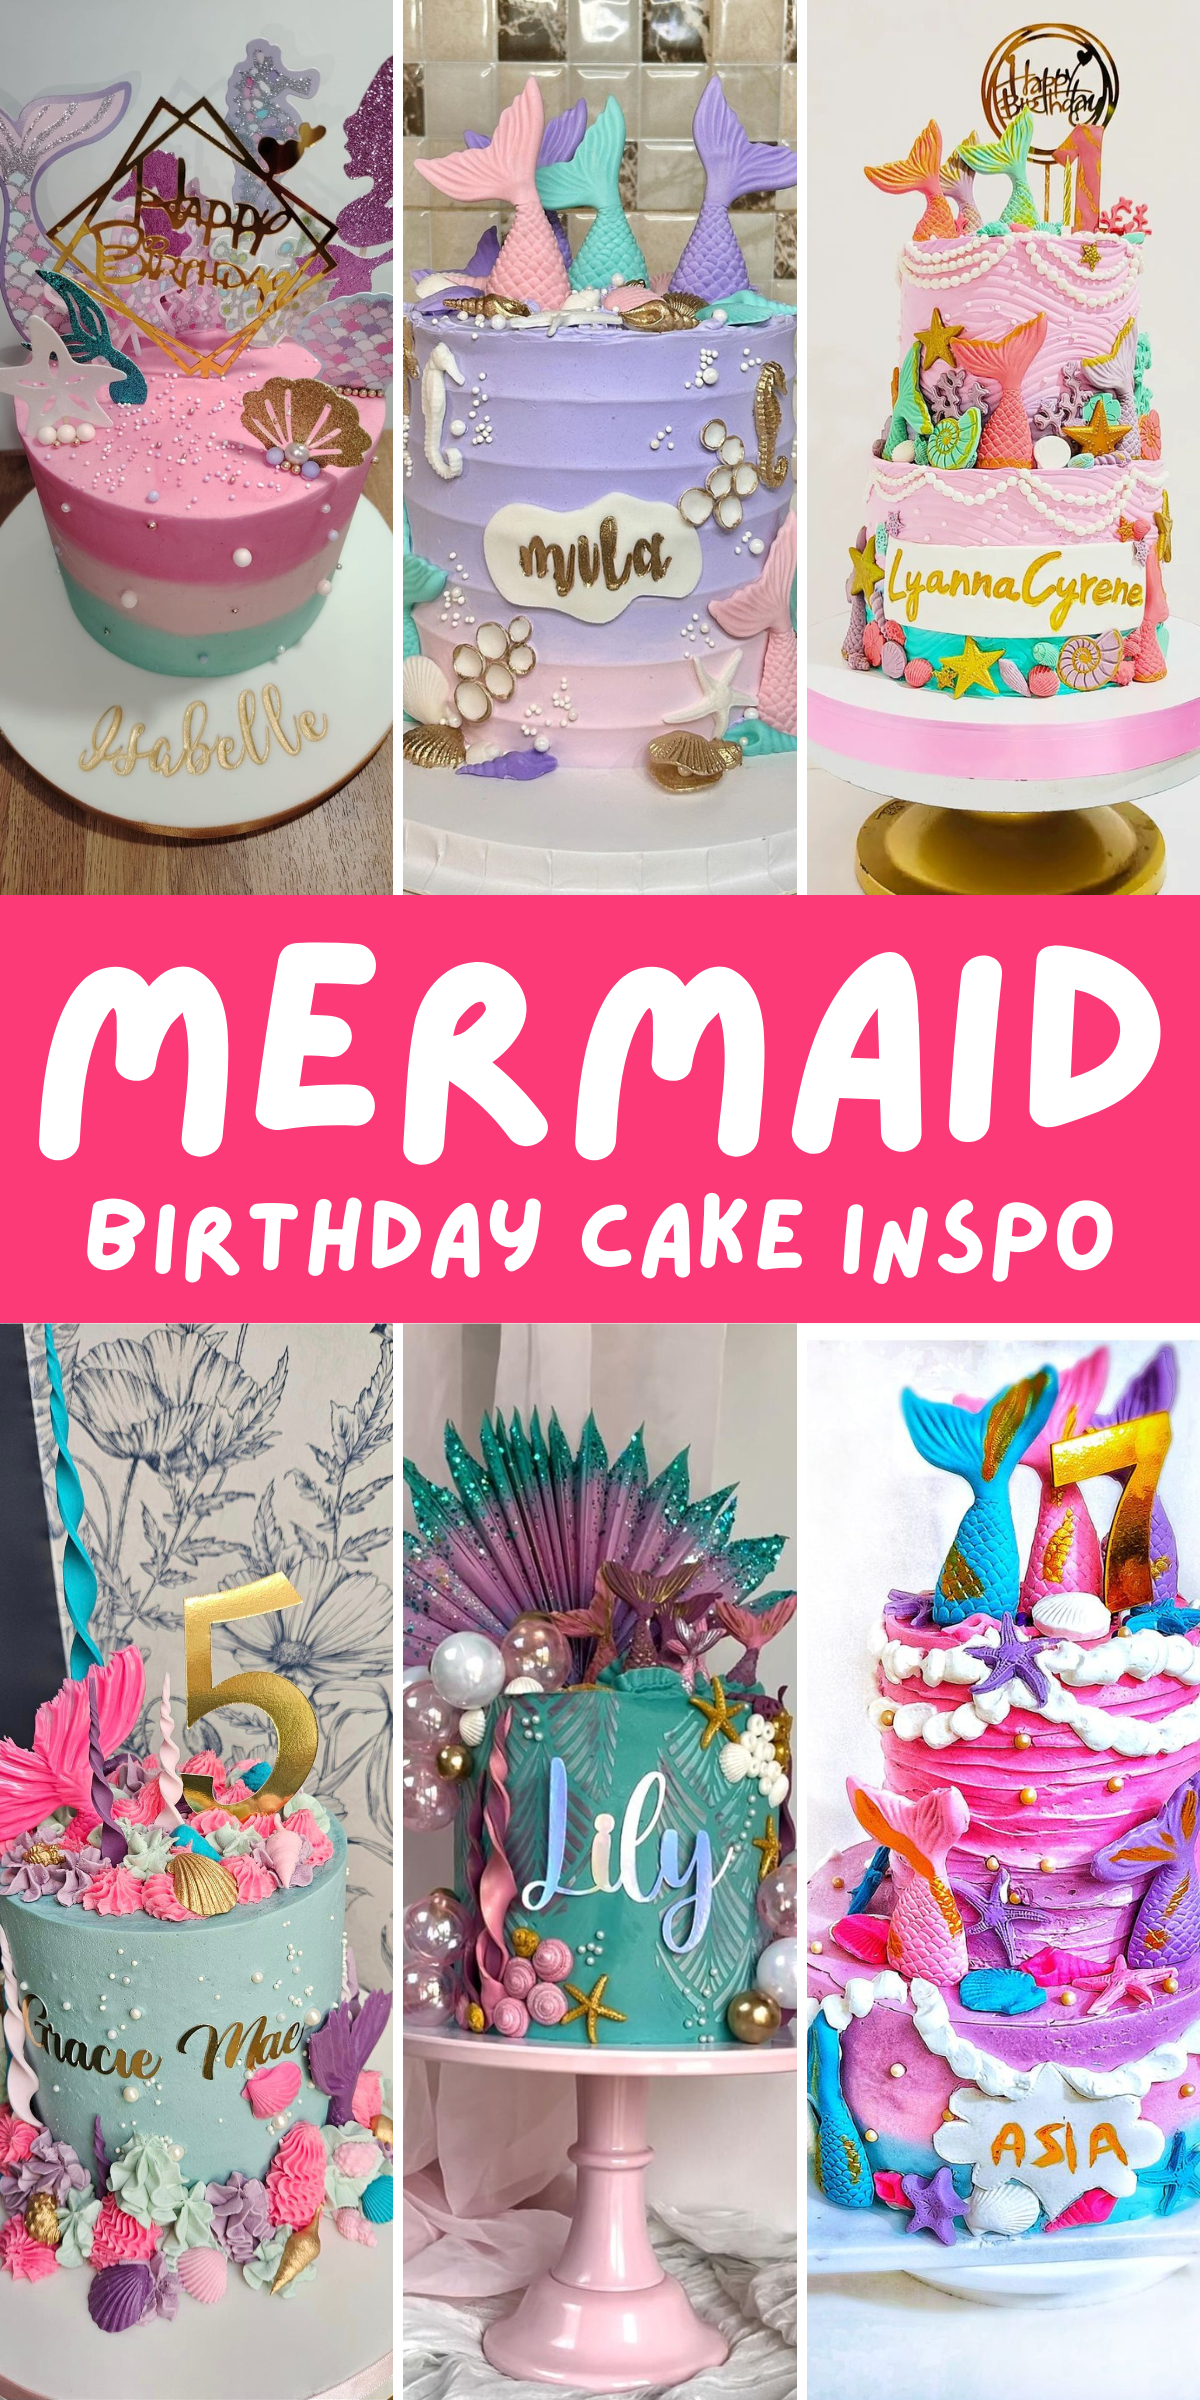 🧜🏻‍♀️🐚🎂 Discover a treasure trove of cake ideas that will transform your birthday celebration into an oceanic fairy tale.